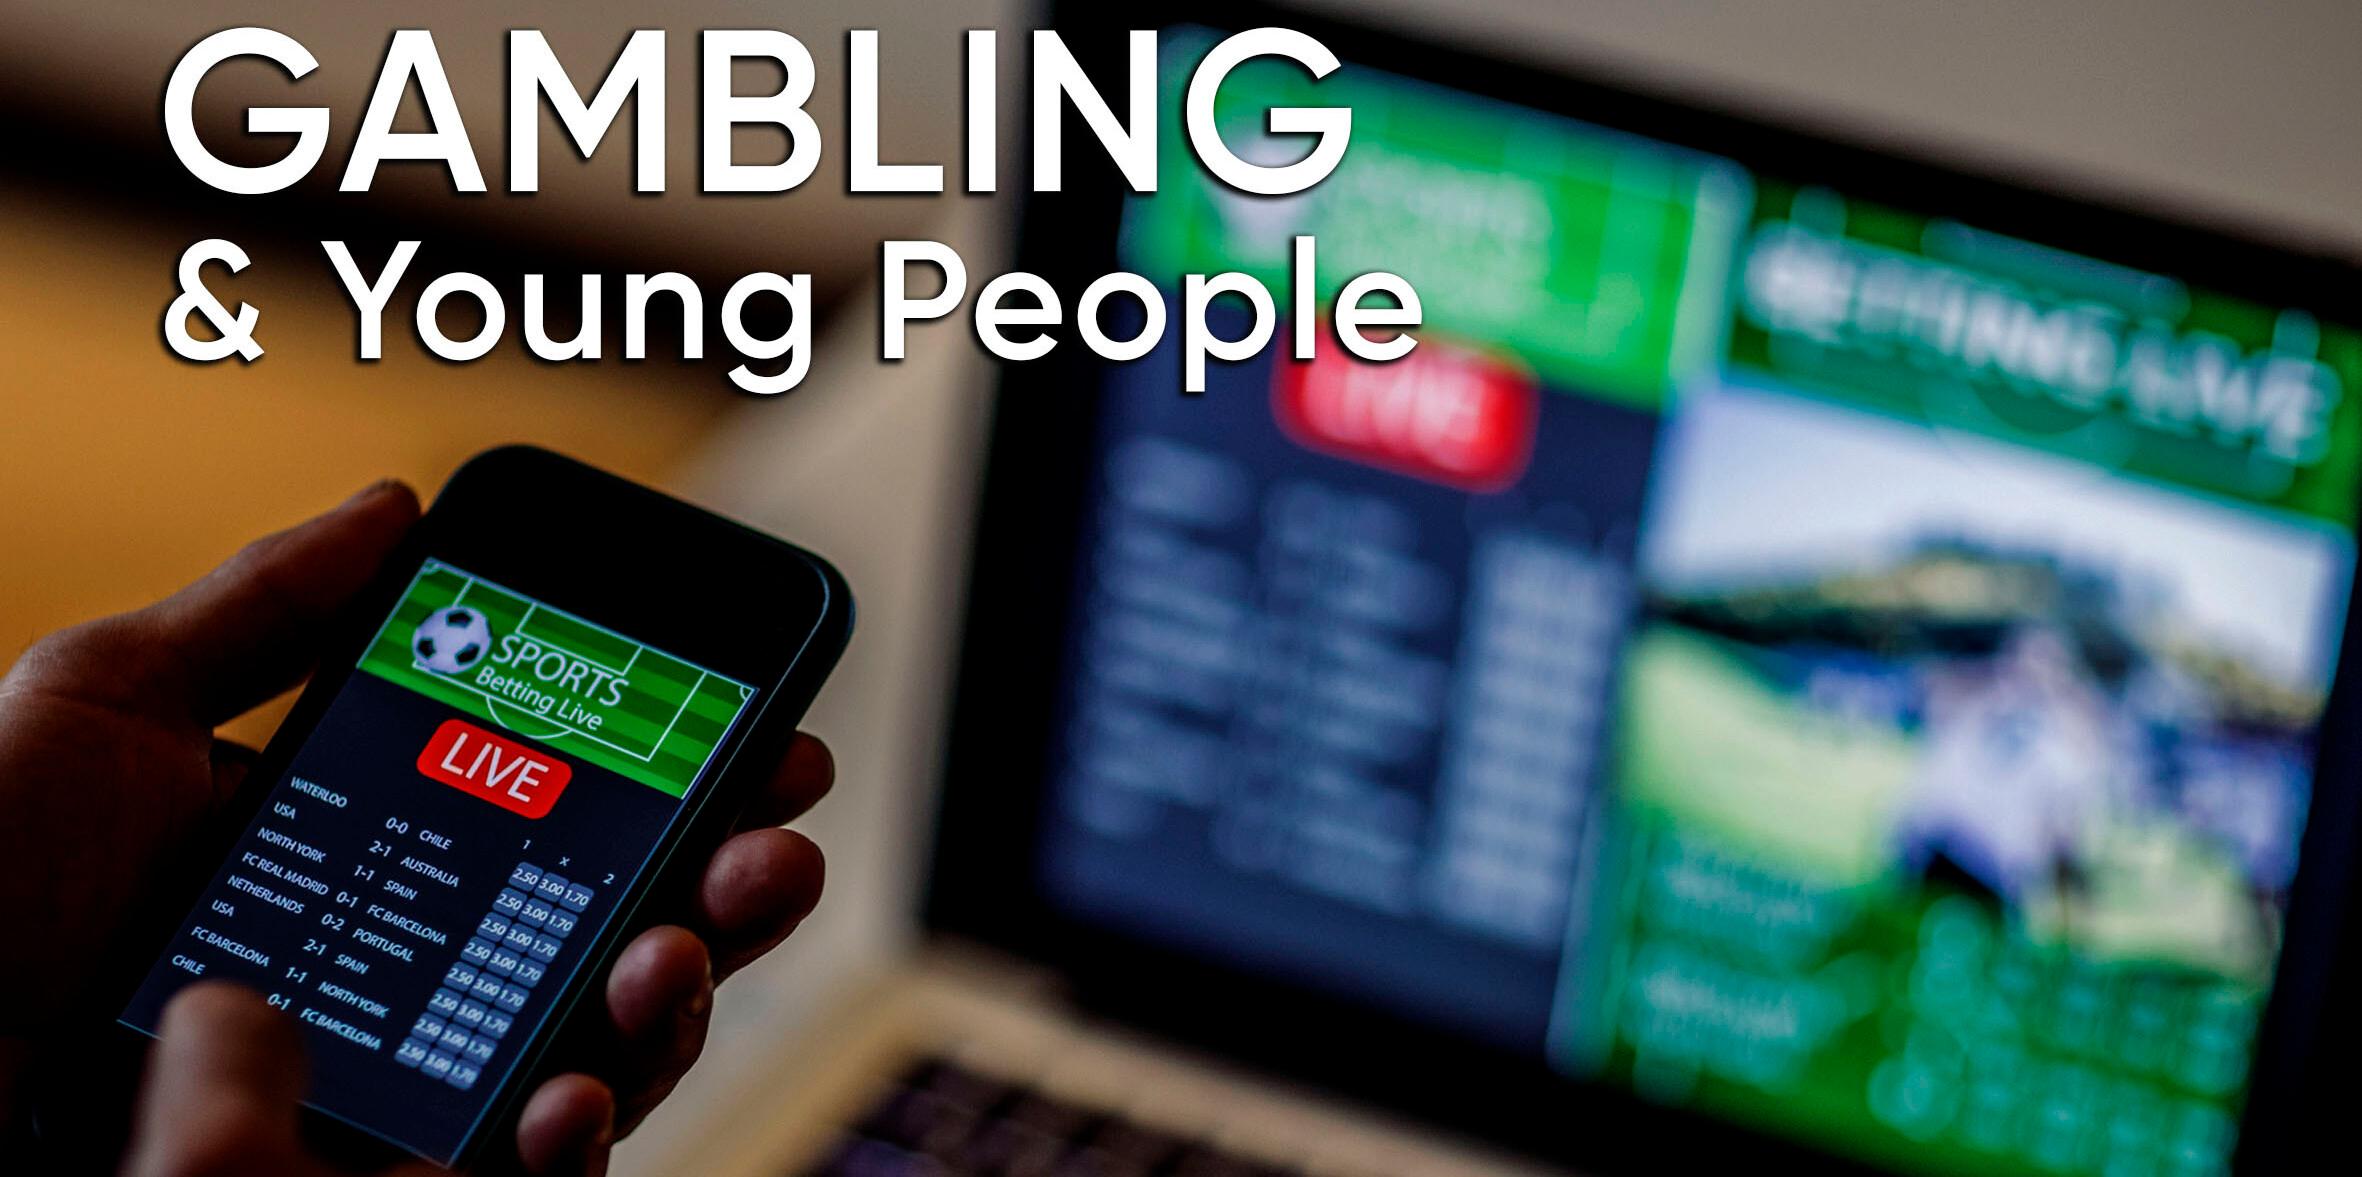 SchoolTV Special Report: Gambling and young people